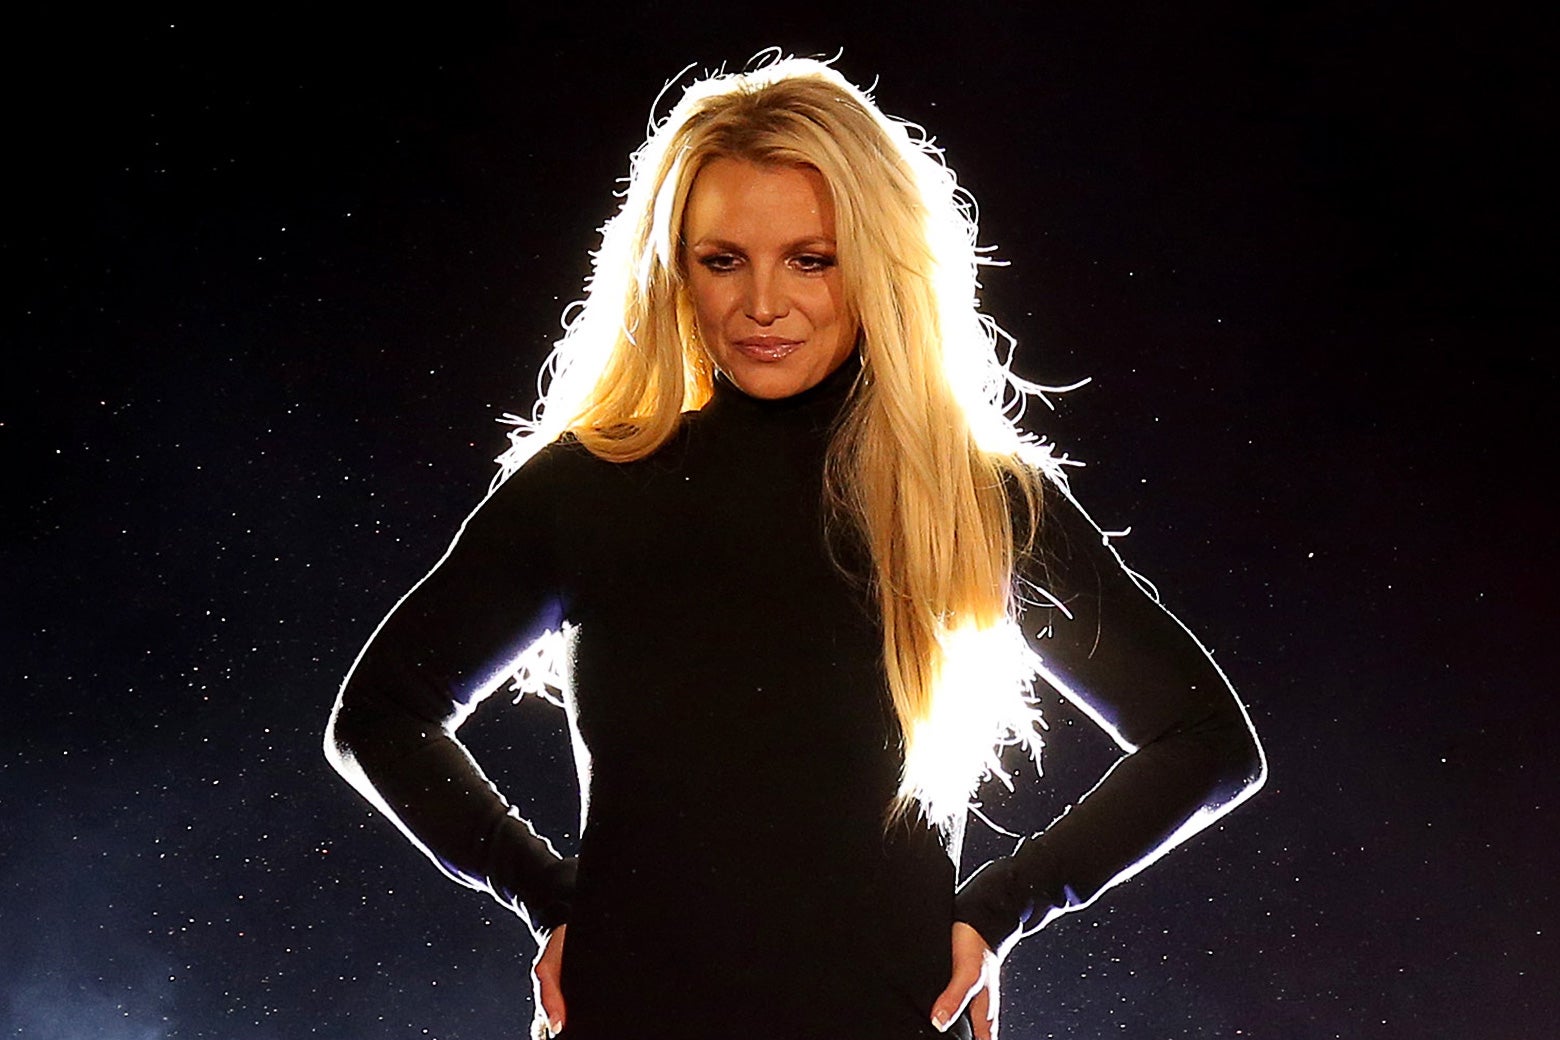 Britney Spears looking pensive onstage in a black dress with her hands on her hips facing the audience